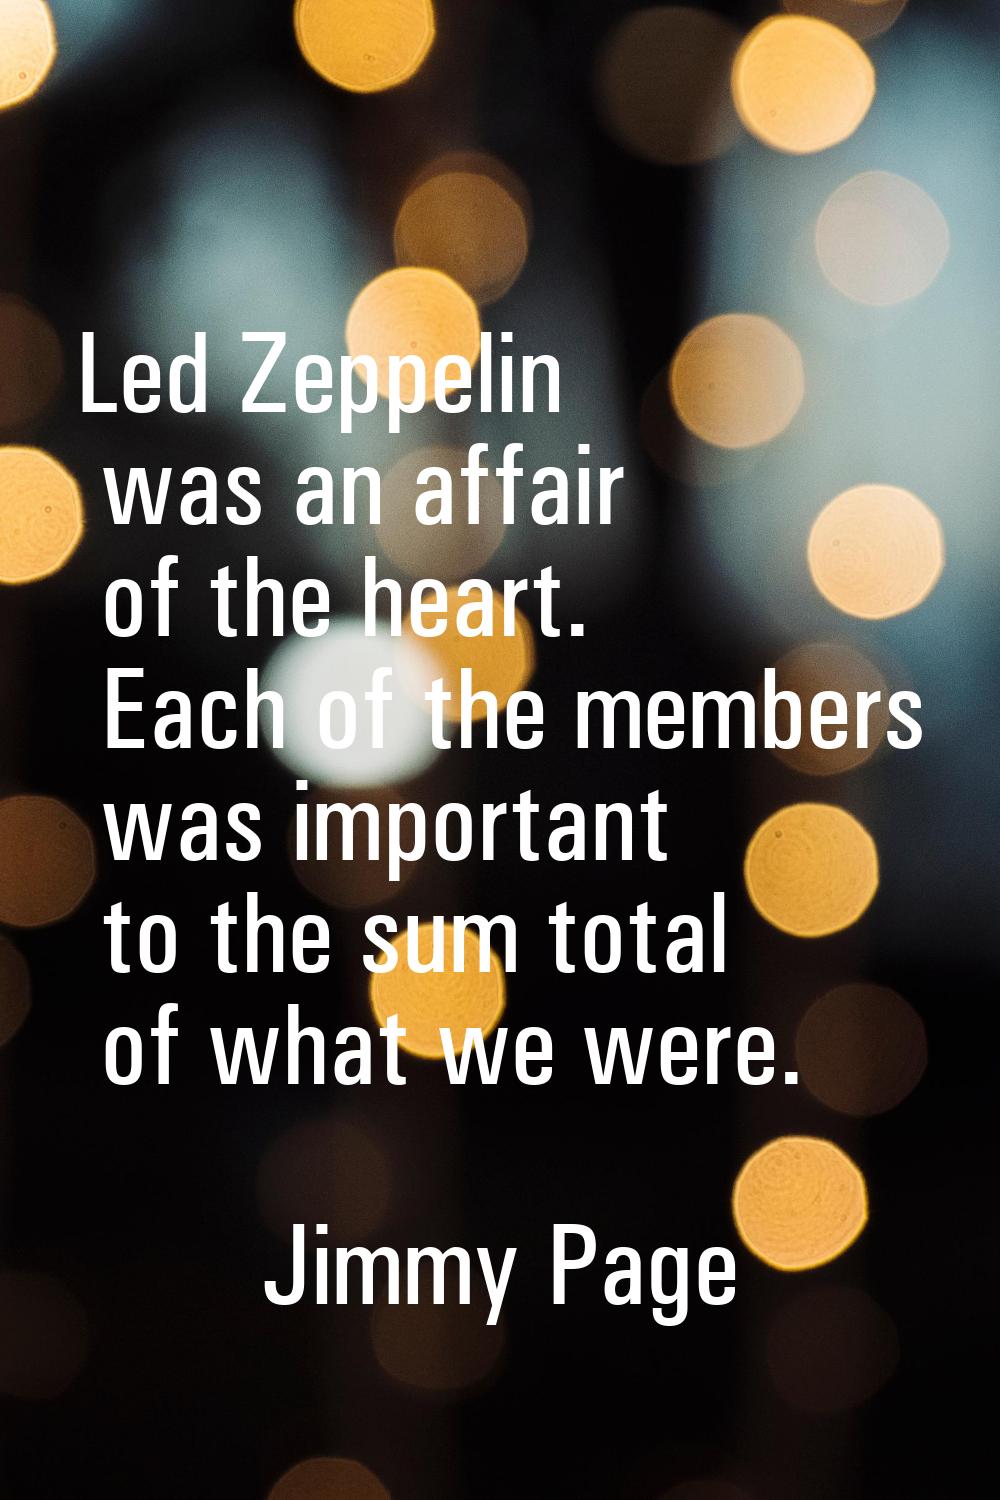 Led Zeppelin was an affair of the heart. Each of the members was important to the sum total of what